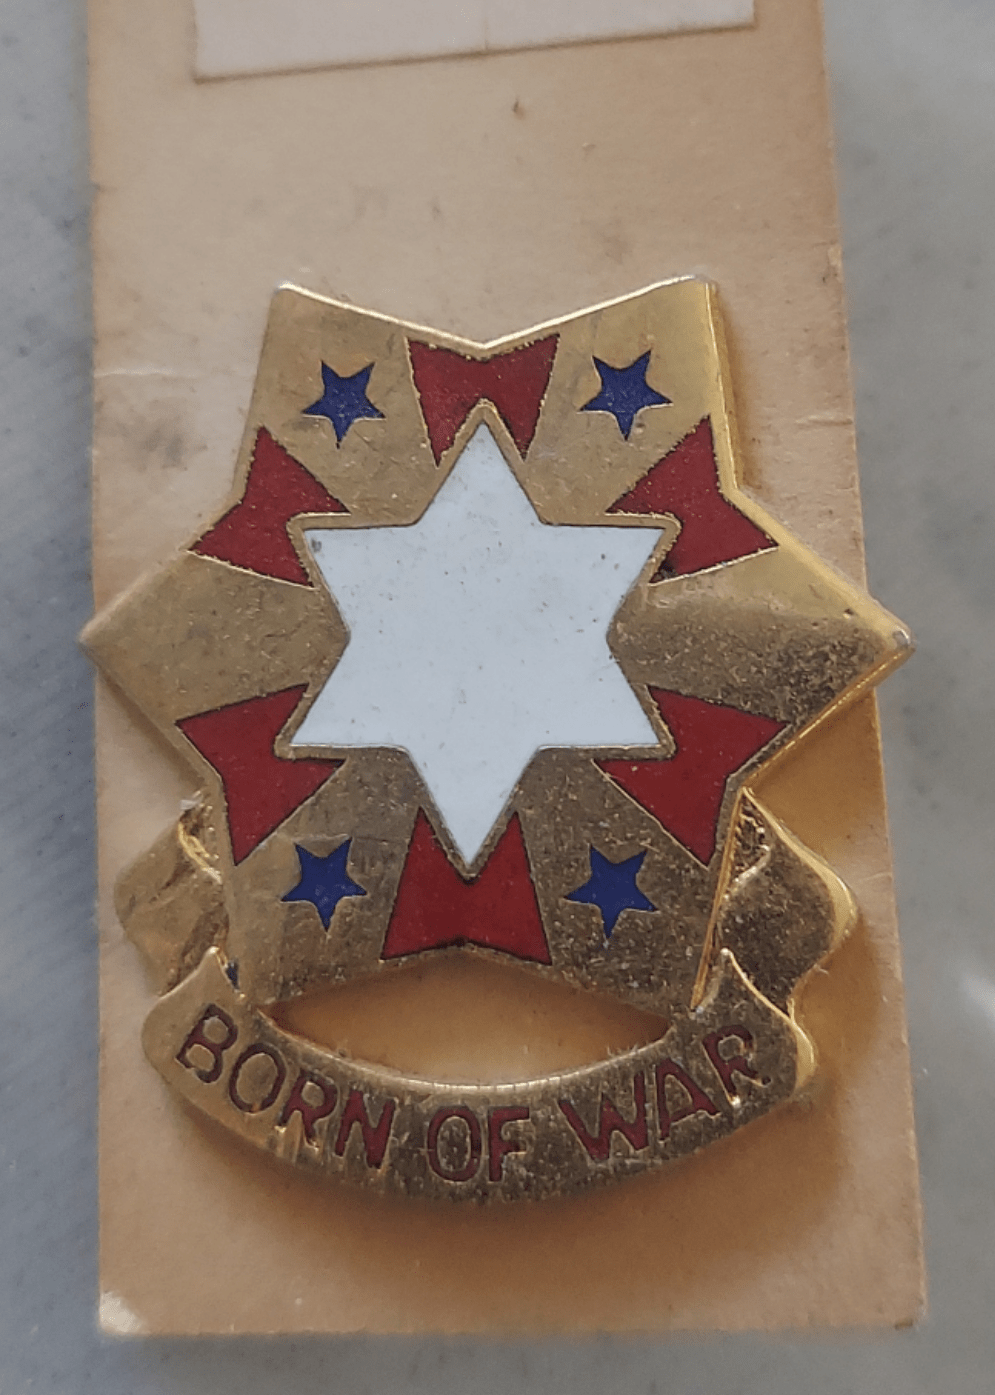 Surplus and More hat pin 6th US Army Unit Crest "Born of War" pin